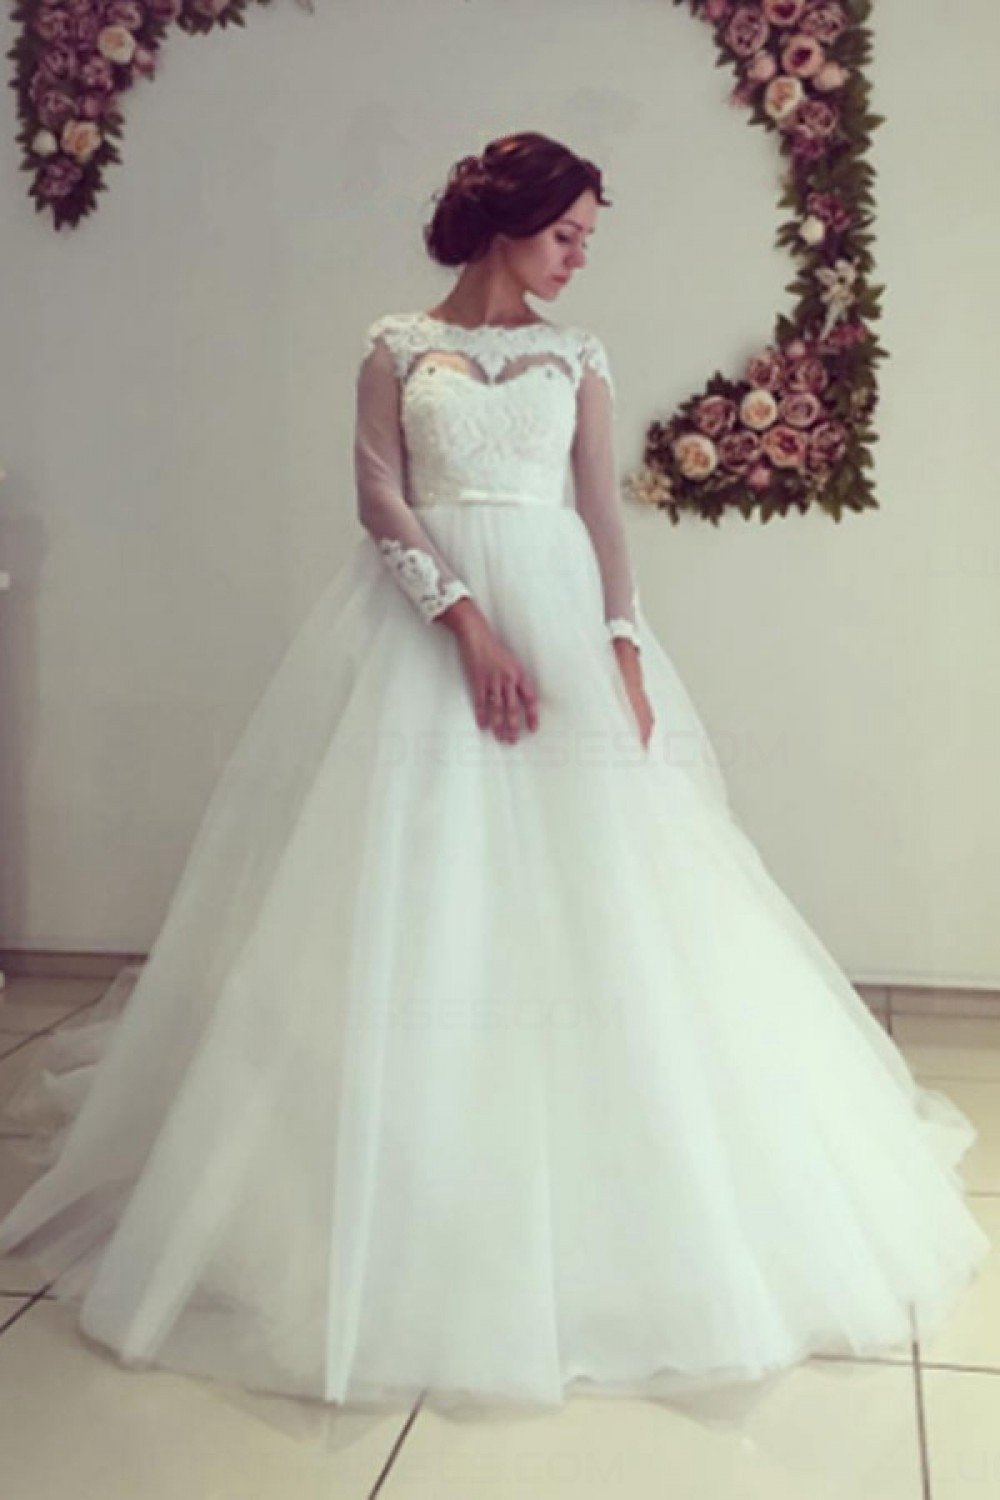 Lace Ball Gown Wedding Dresses
 Long Sleeves Lace Ball Gown Wedding Dresses Bridal Gowns